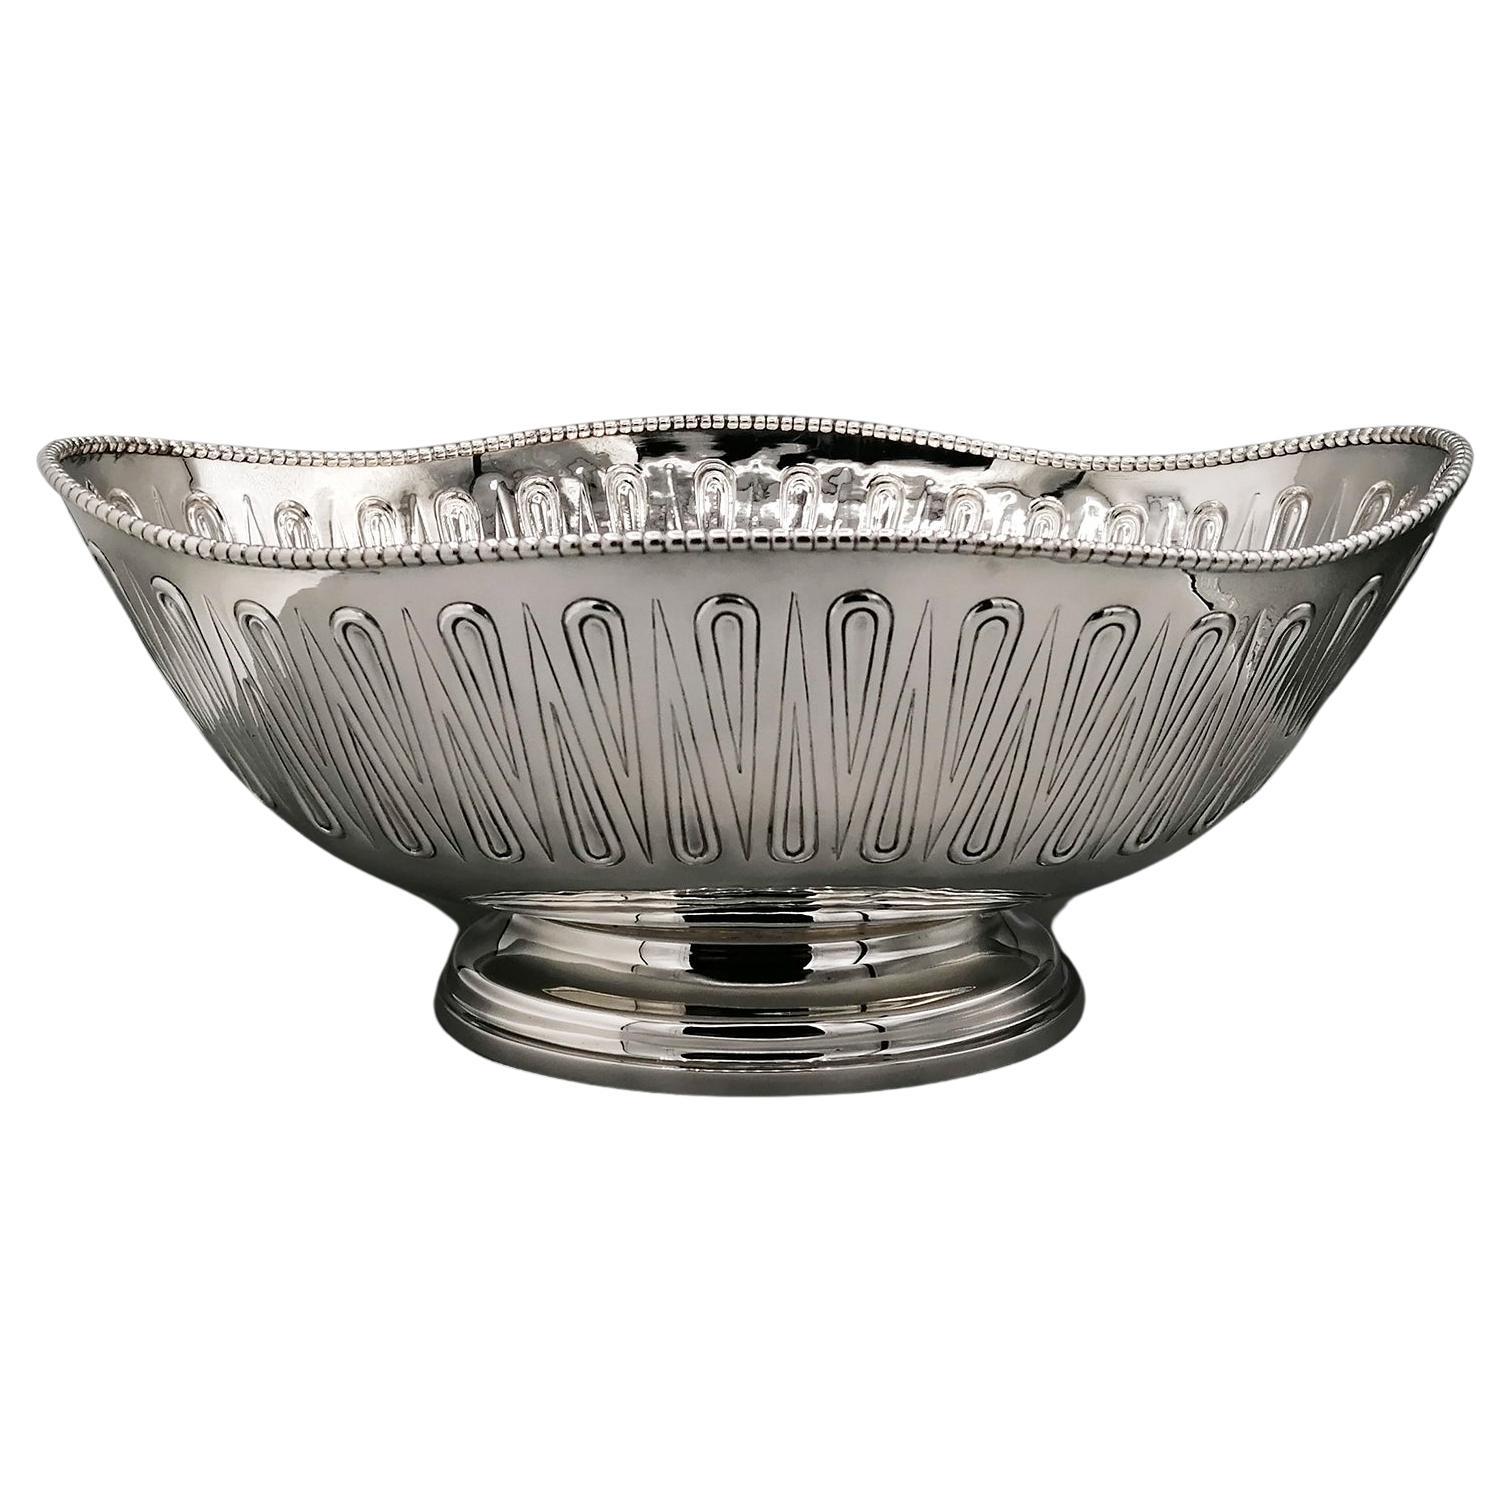 XX Centiry Italian Solid 800 Silver Centrepiece - Jatte For Sale